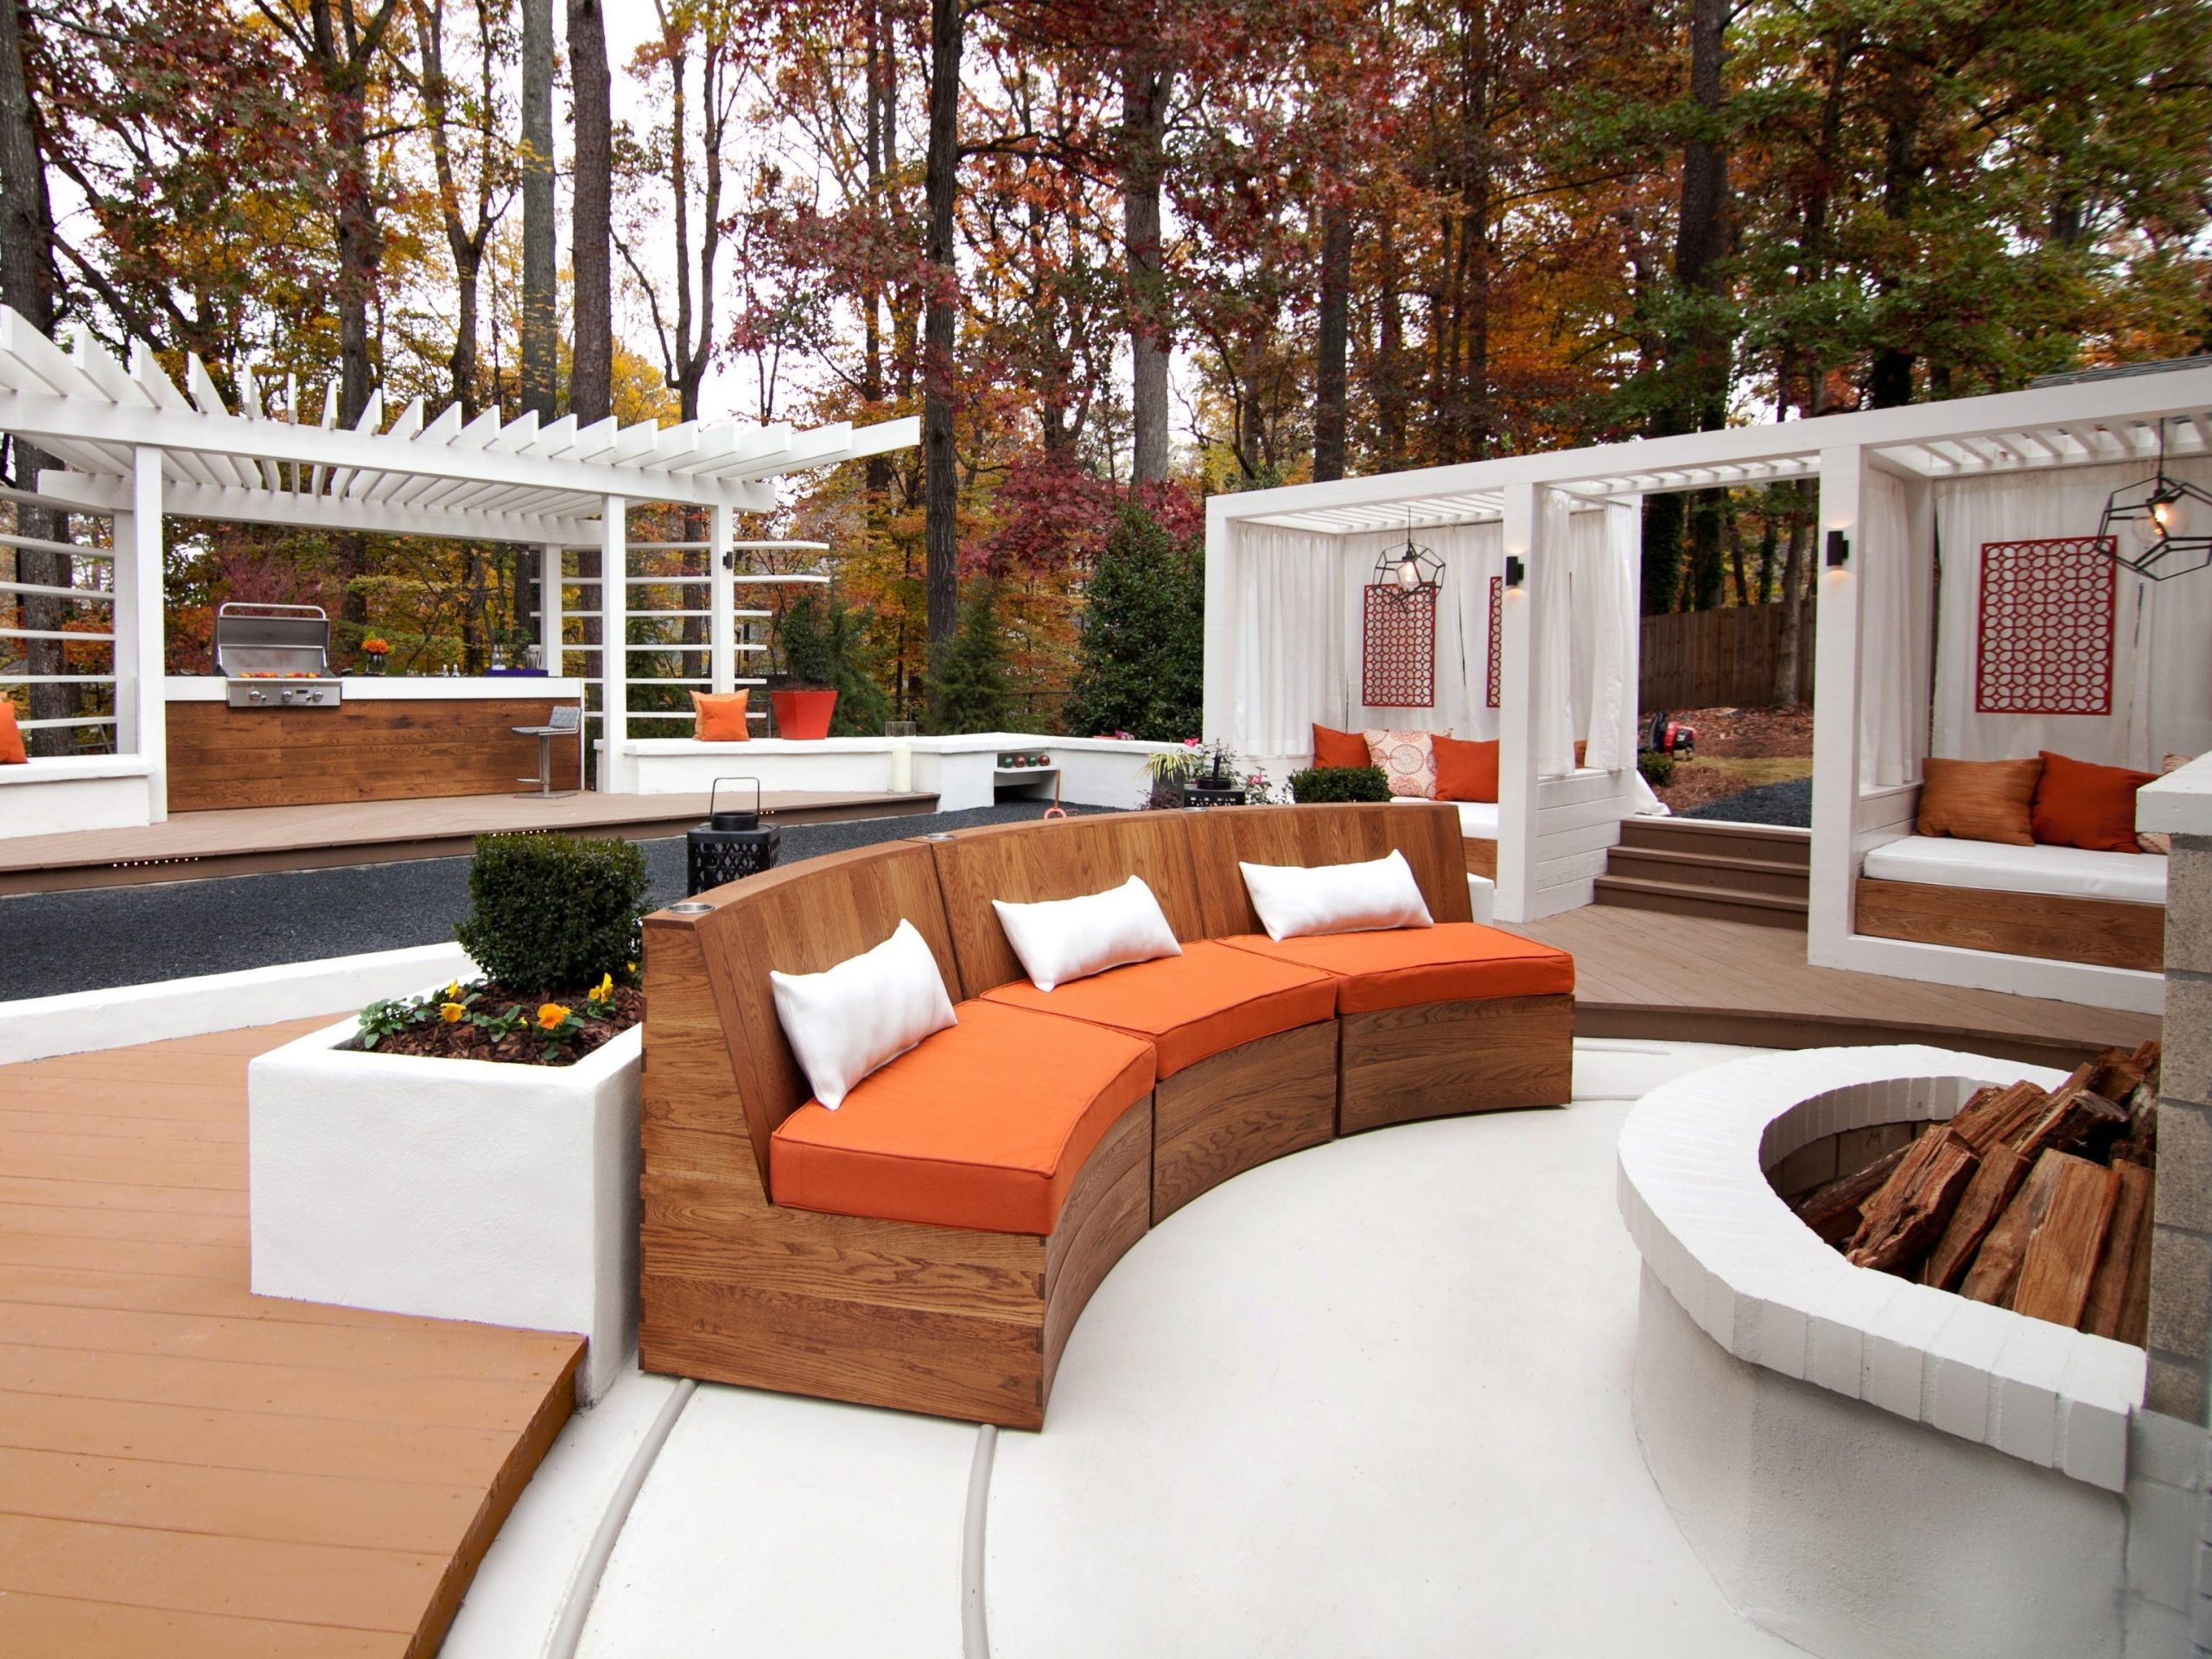 A luxury backyard with a grill, wooden decking, and a large couch in front of a fire pit